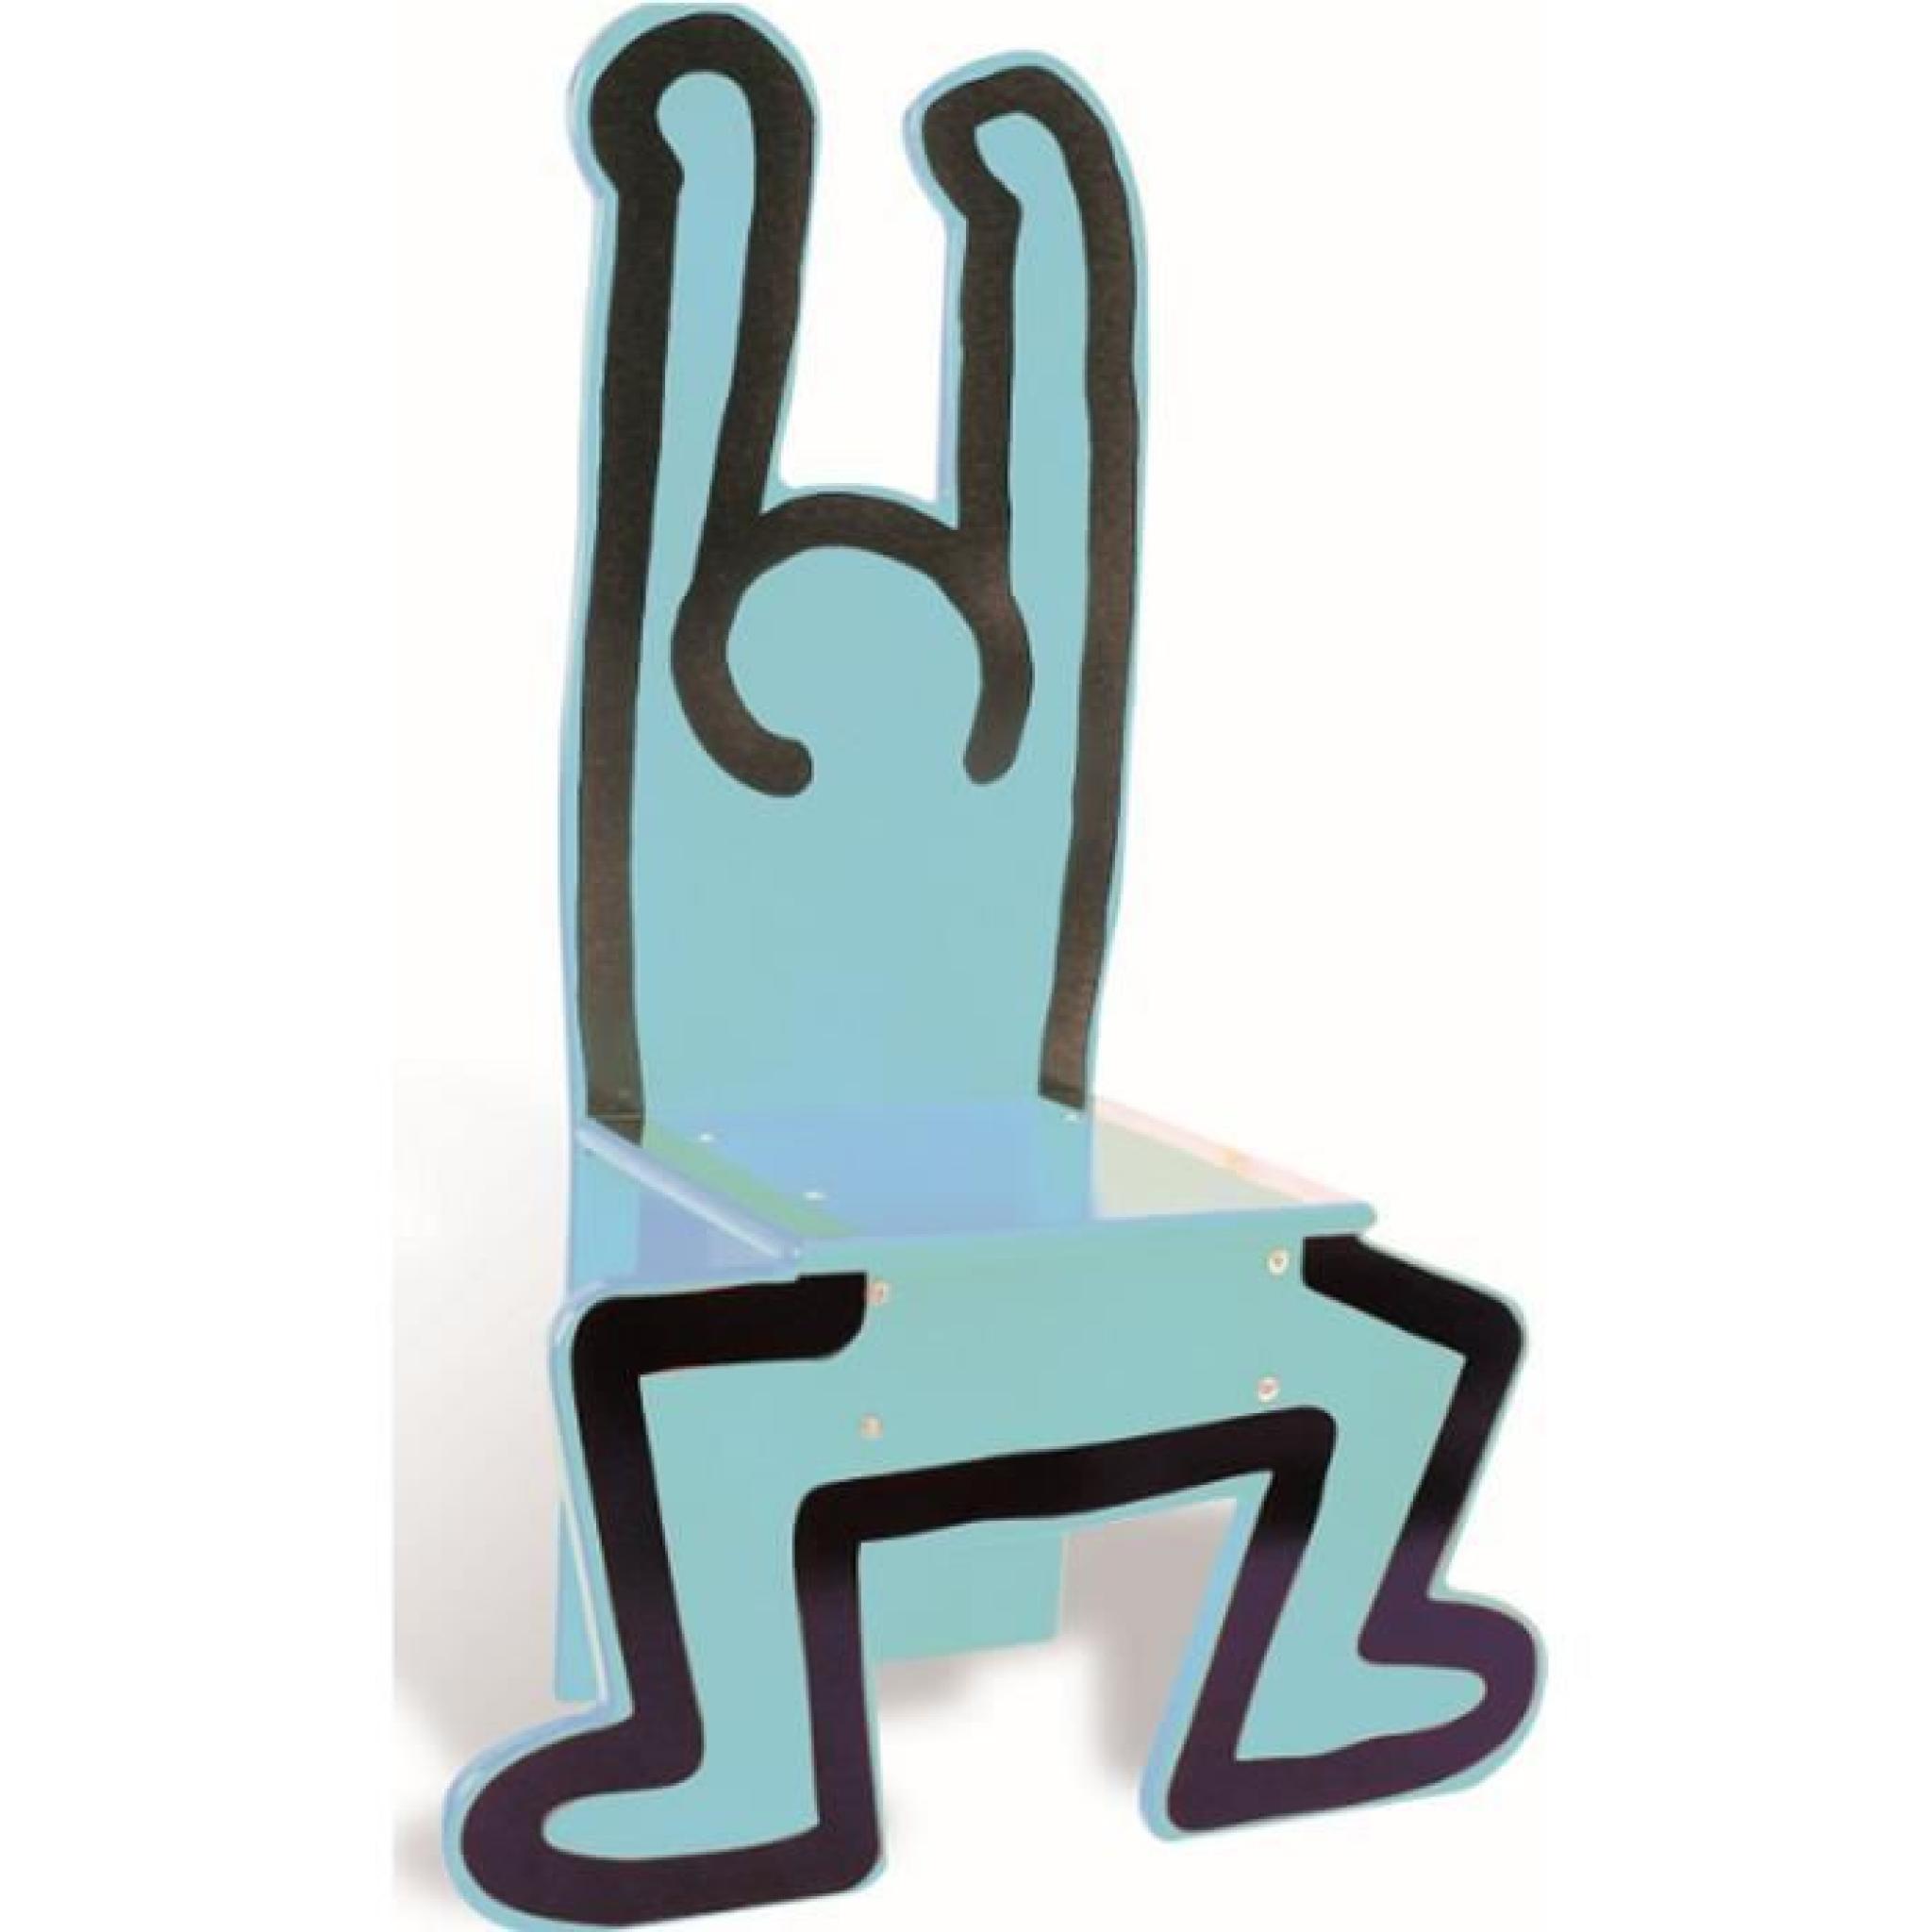 Chaise Keith Haring bleue turquoise